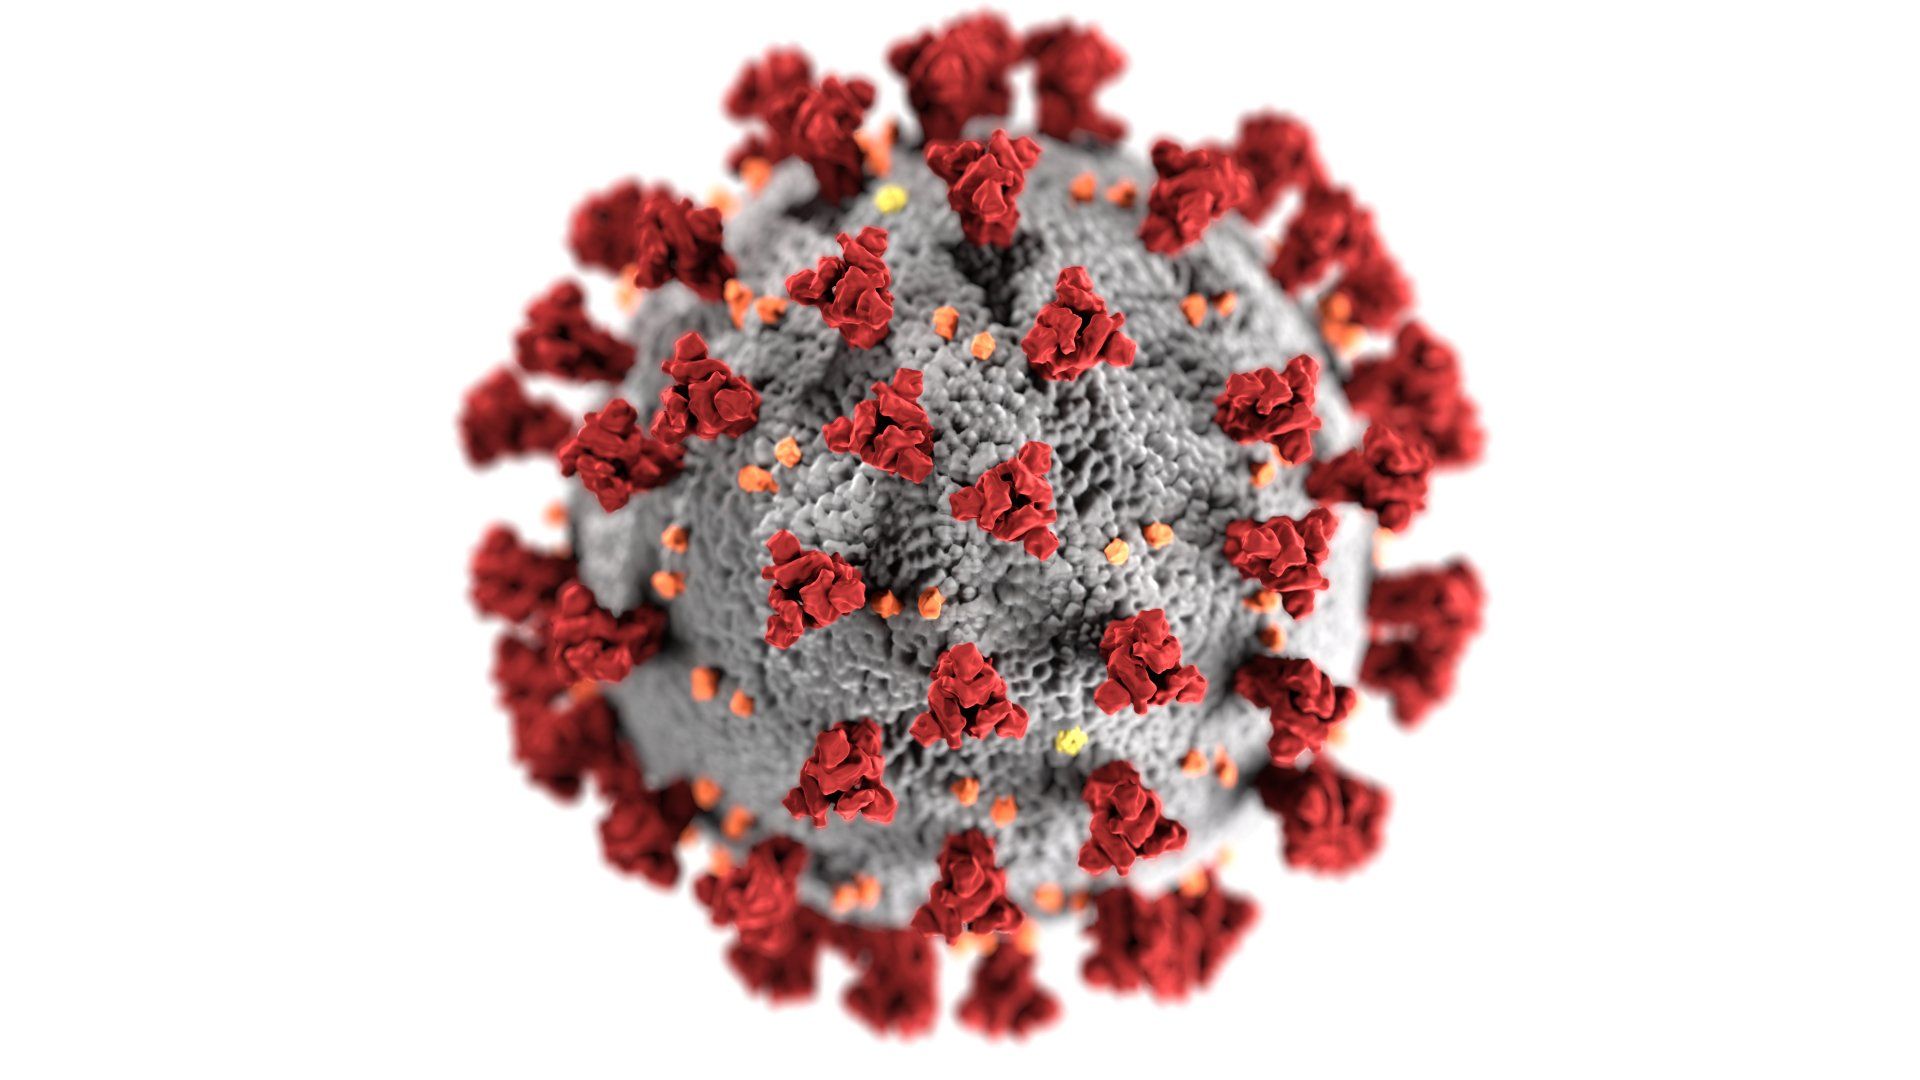 A close up of a virus on a white background.